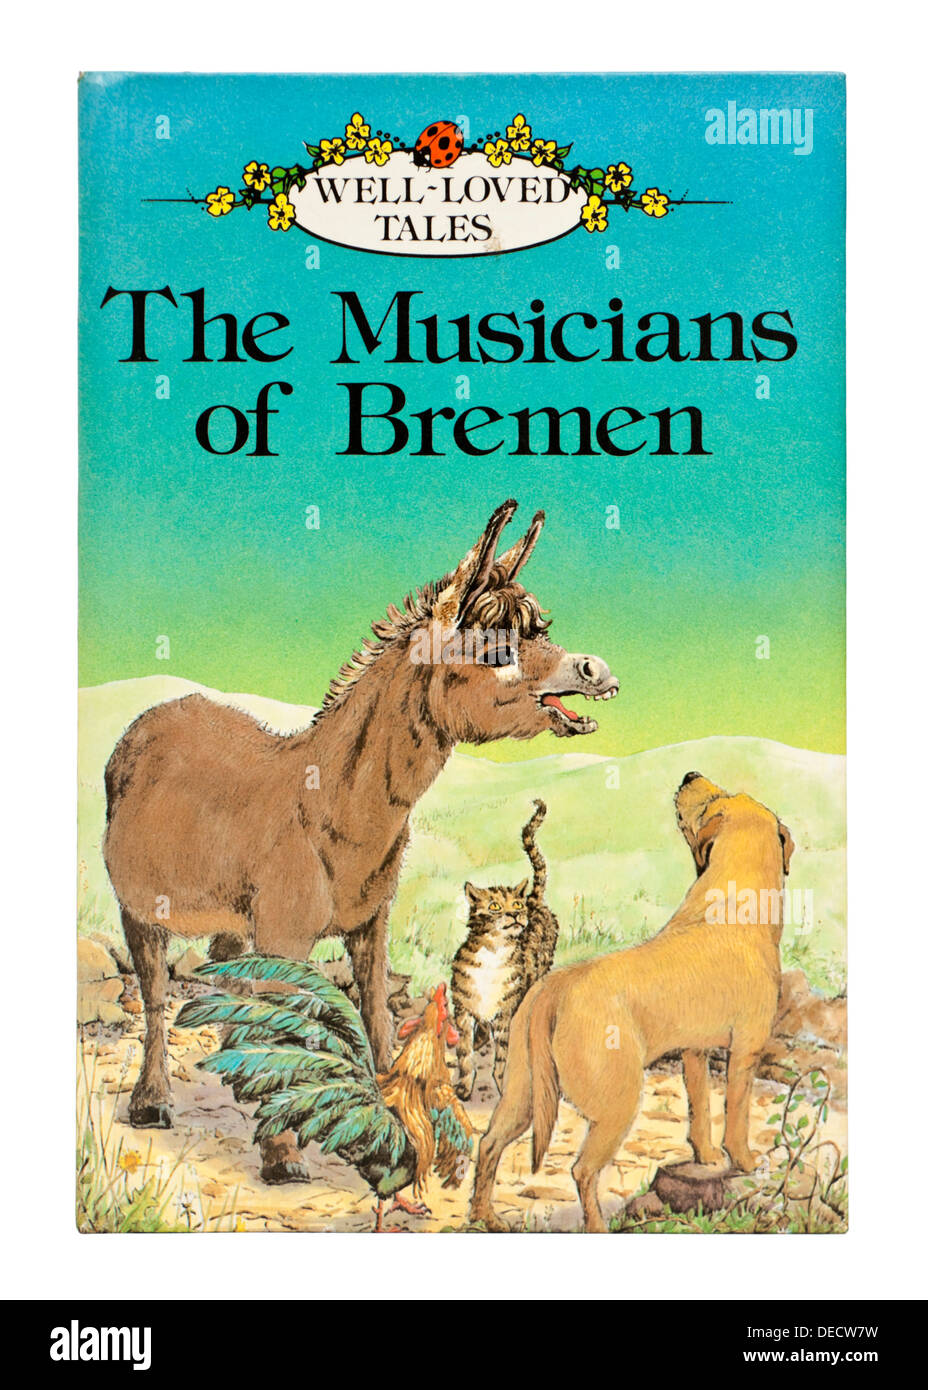 Vintage 1982 edition Ladybird children's book 'The Musicians of Bremen' (Well-Loved Tales Series) Stock Photo